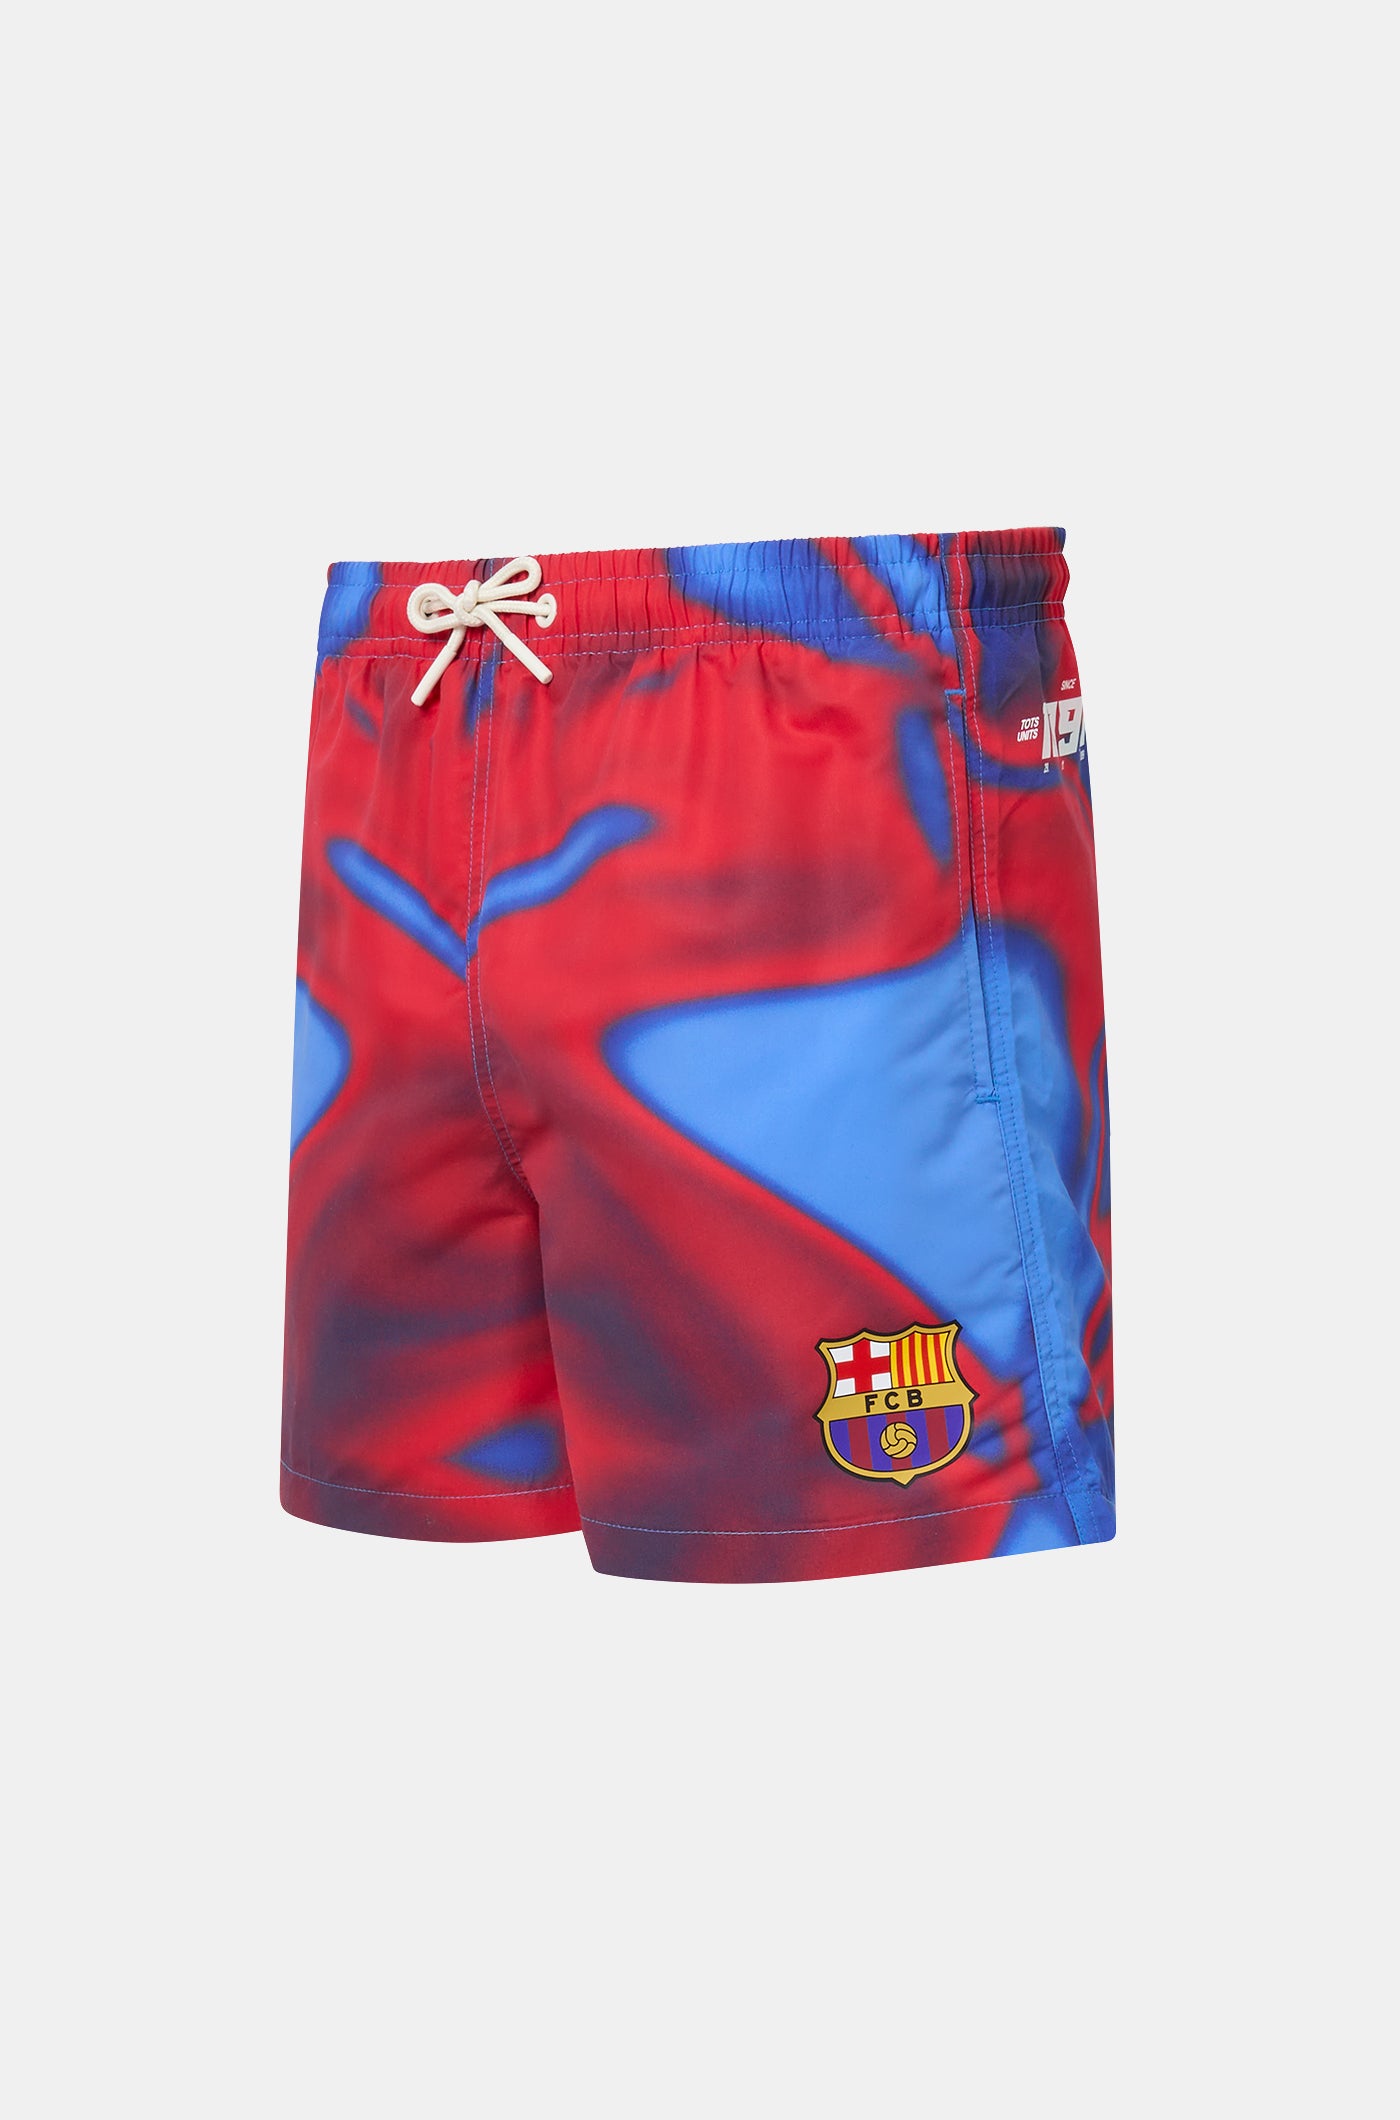 Swimming shorts crest Barça with shapes